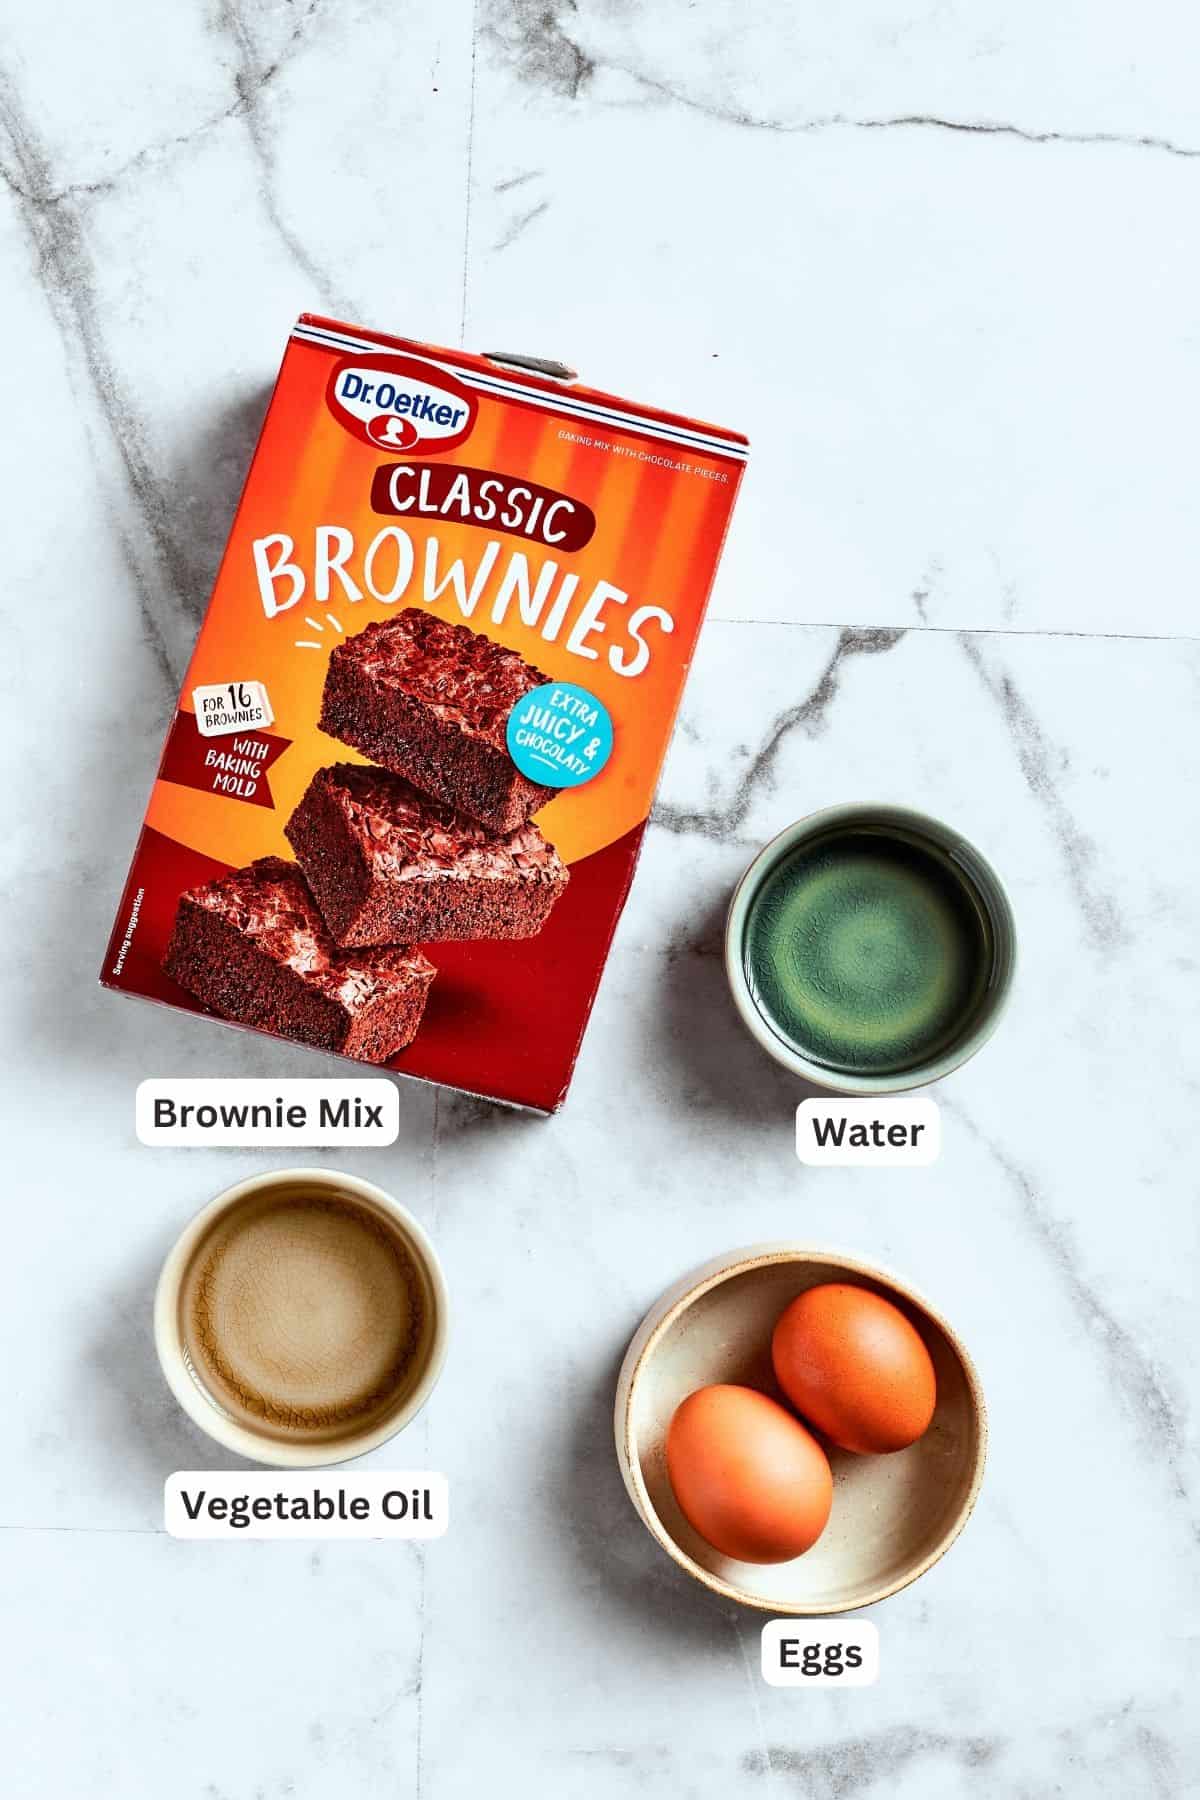 The ingredients for pecan pie brownies are shown: brownie mix, eggs, water, oil.